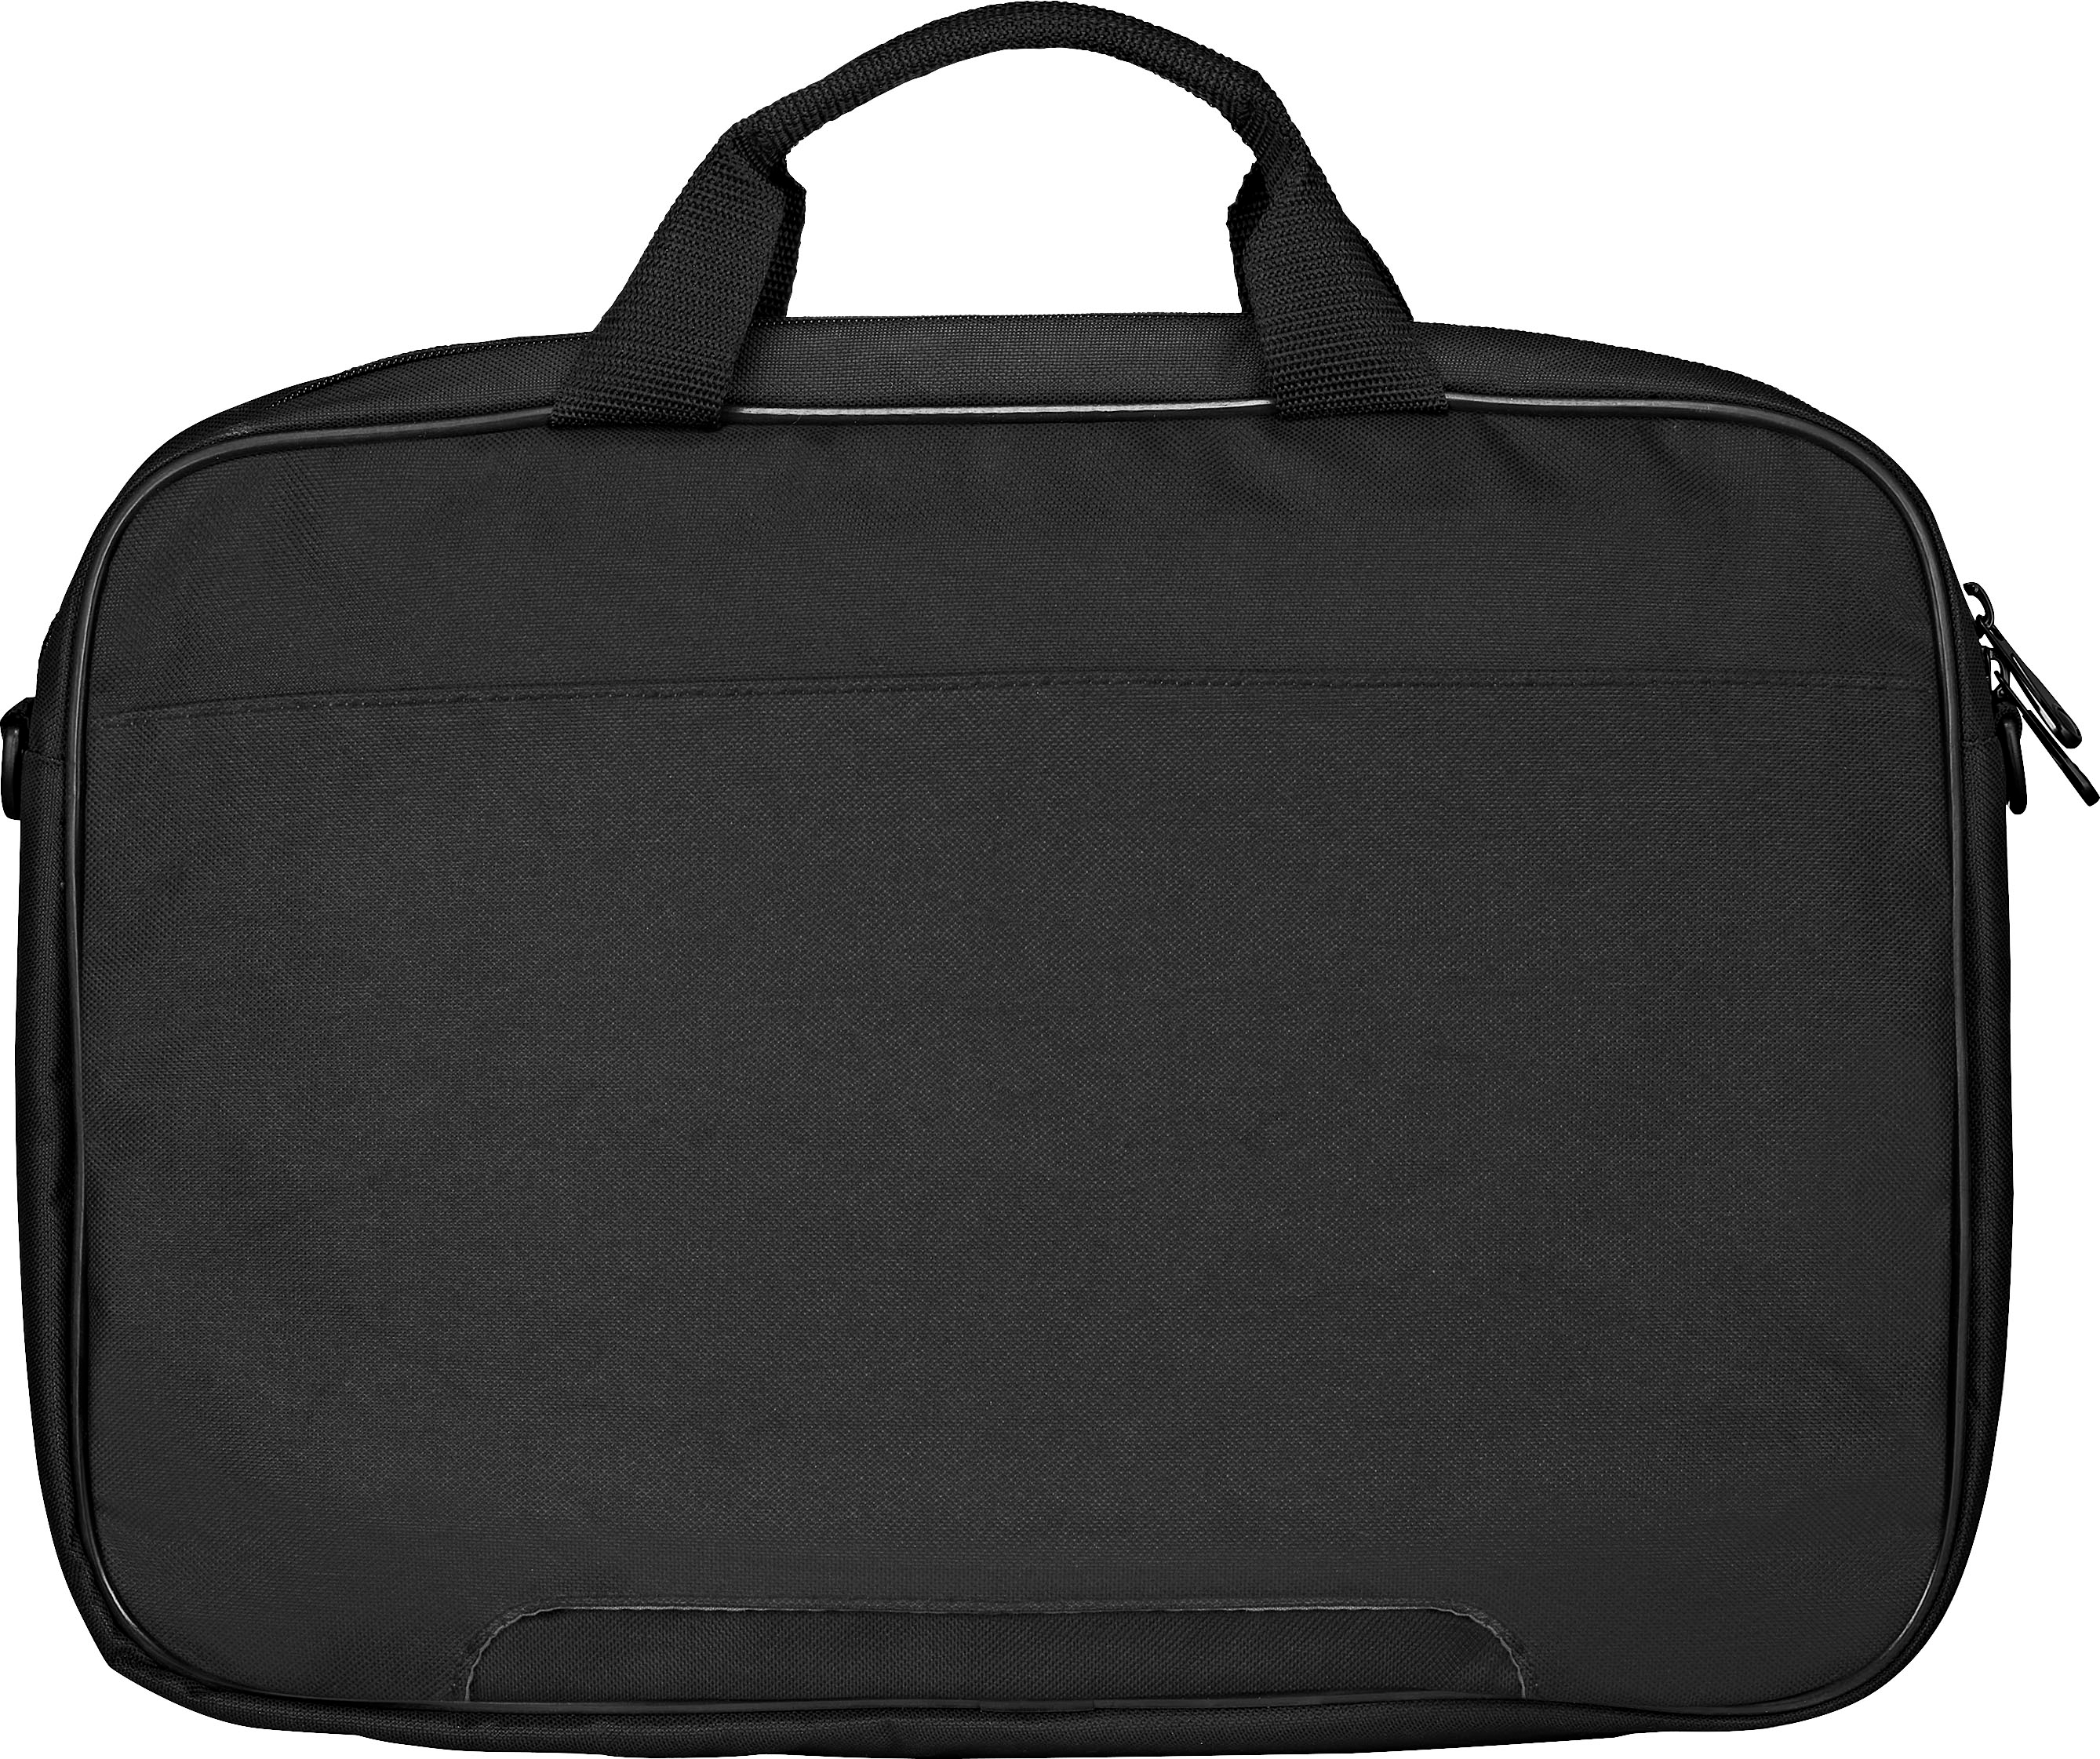 Back View: Insignia™ - Laptop Briefcase for 15.6" Laptop - Black